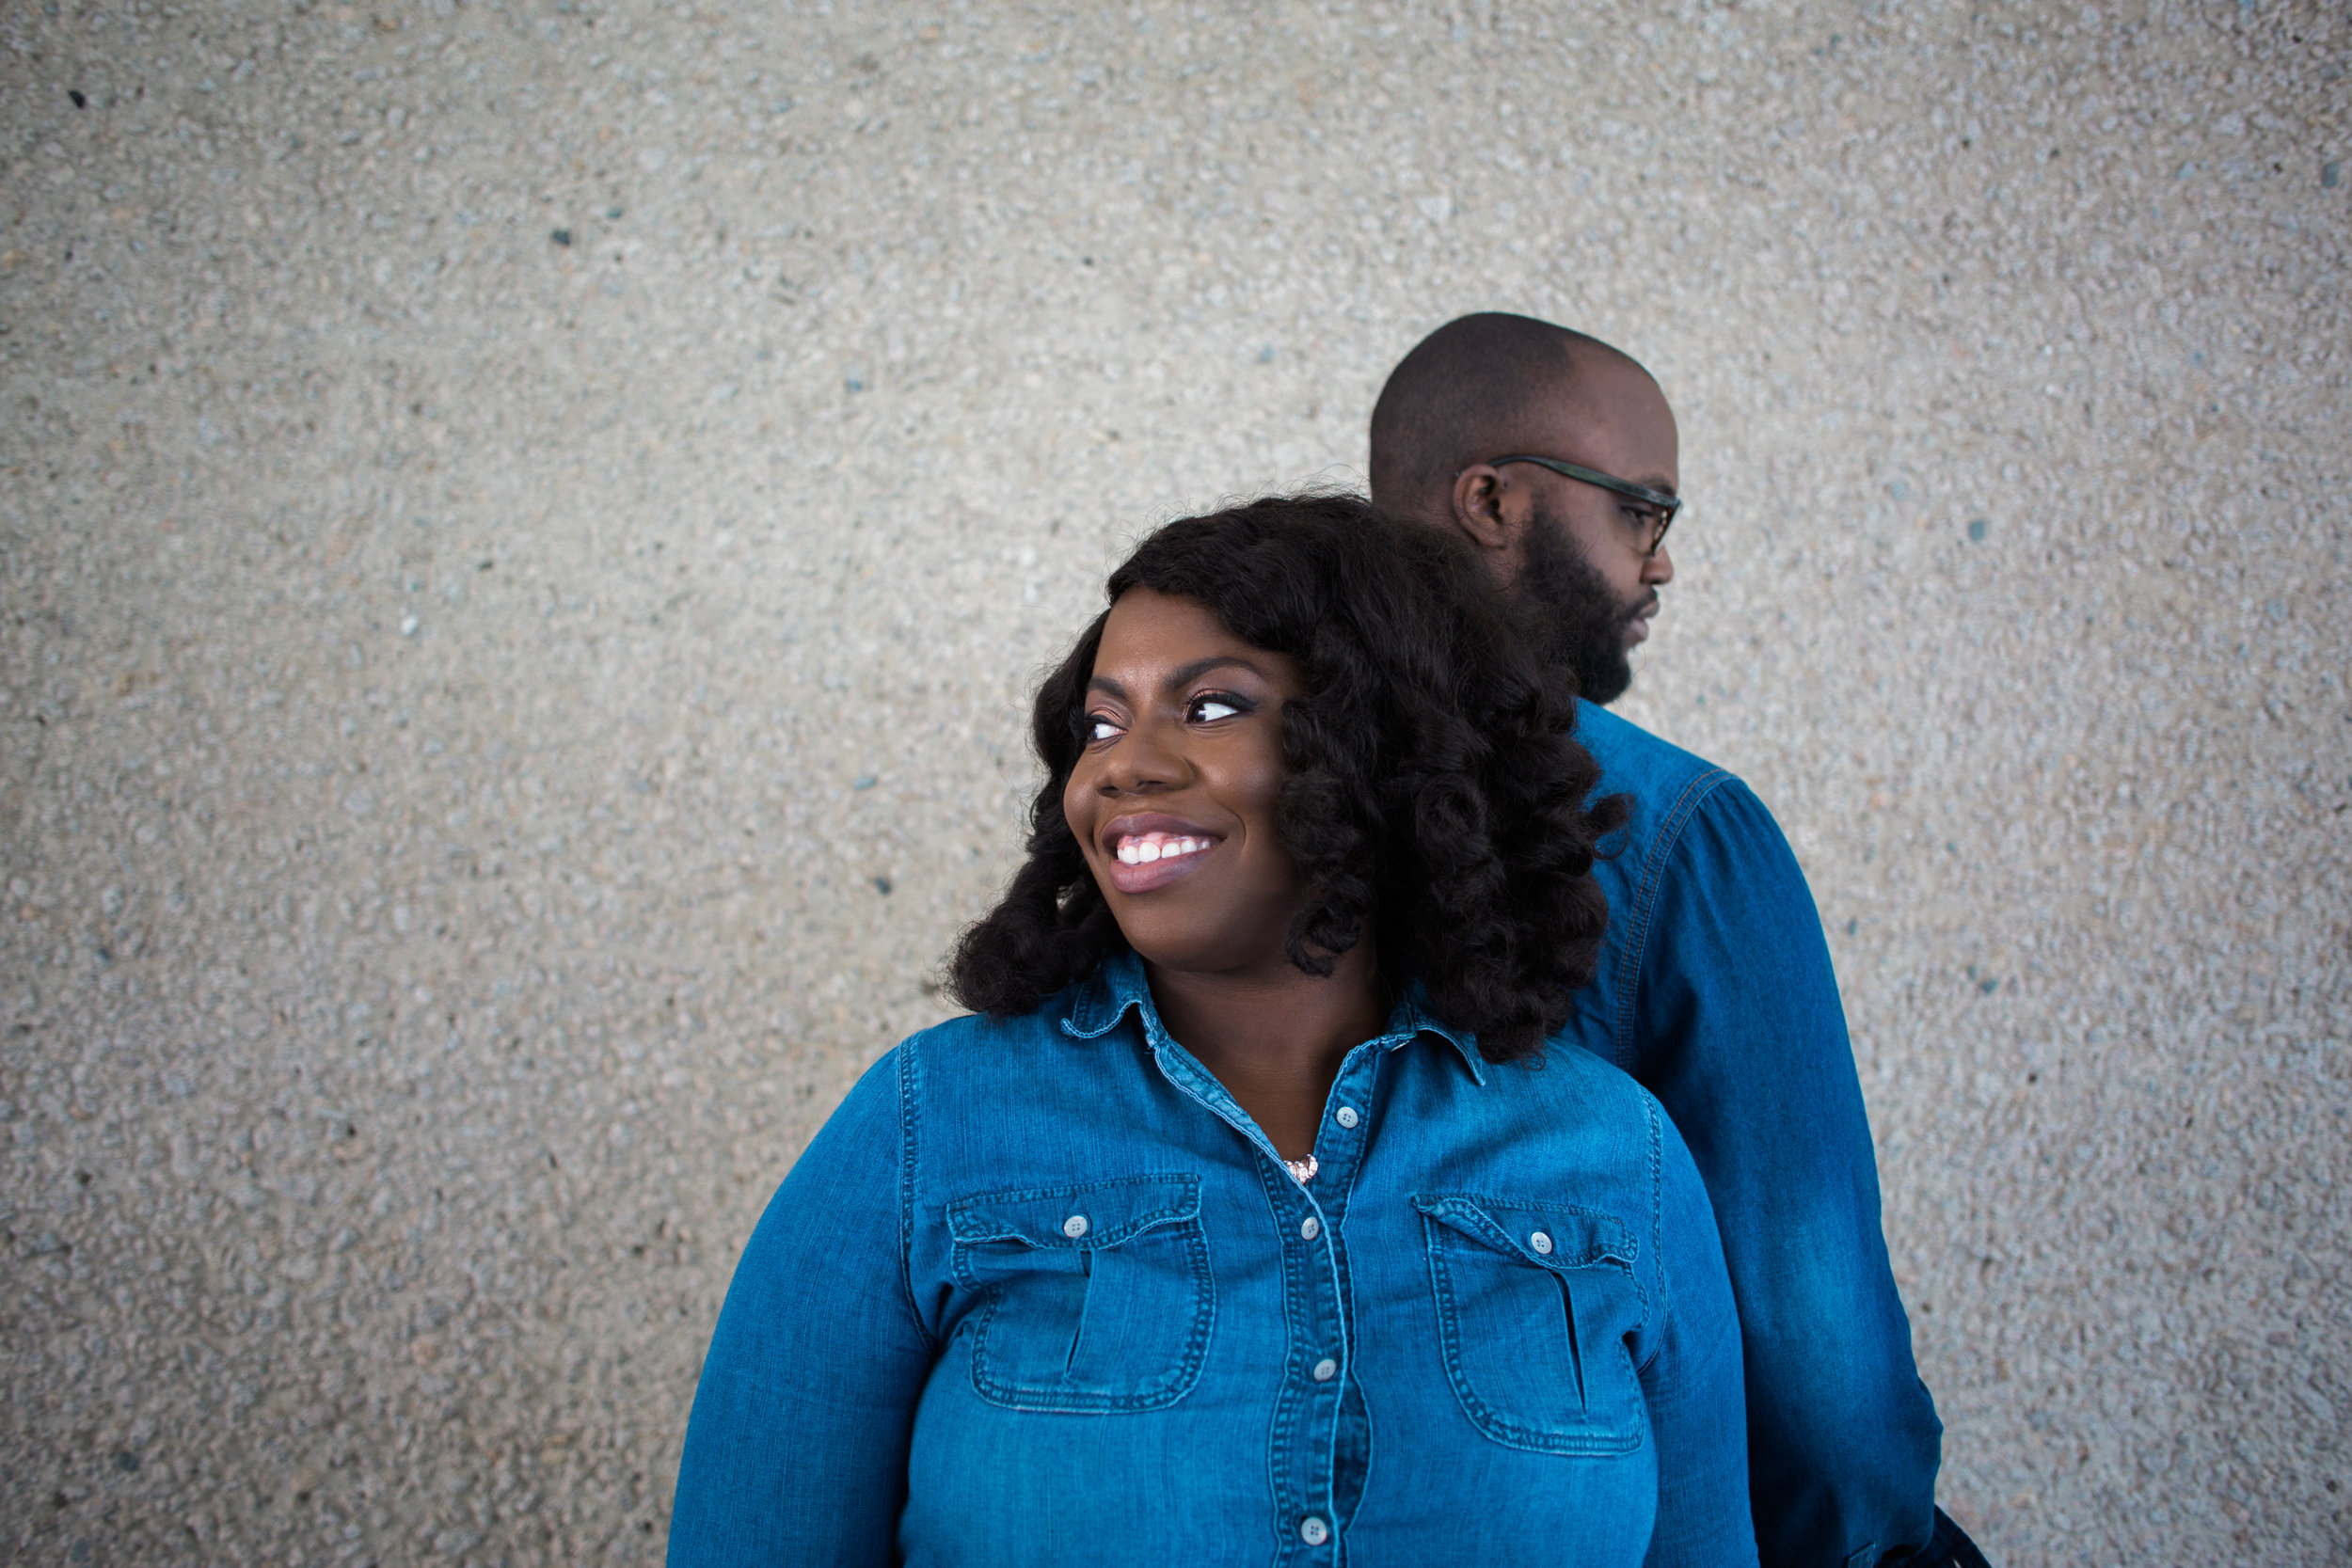 DC Engagement Session at th Hishhorn Museum-2.jpg